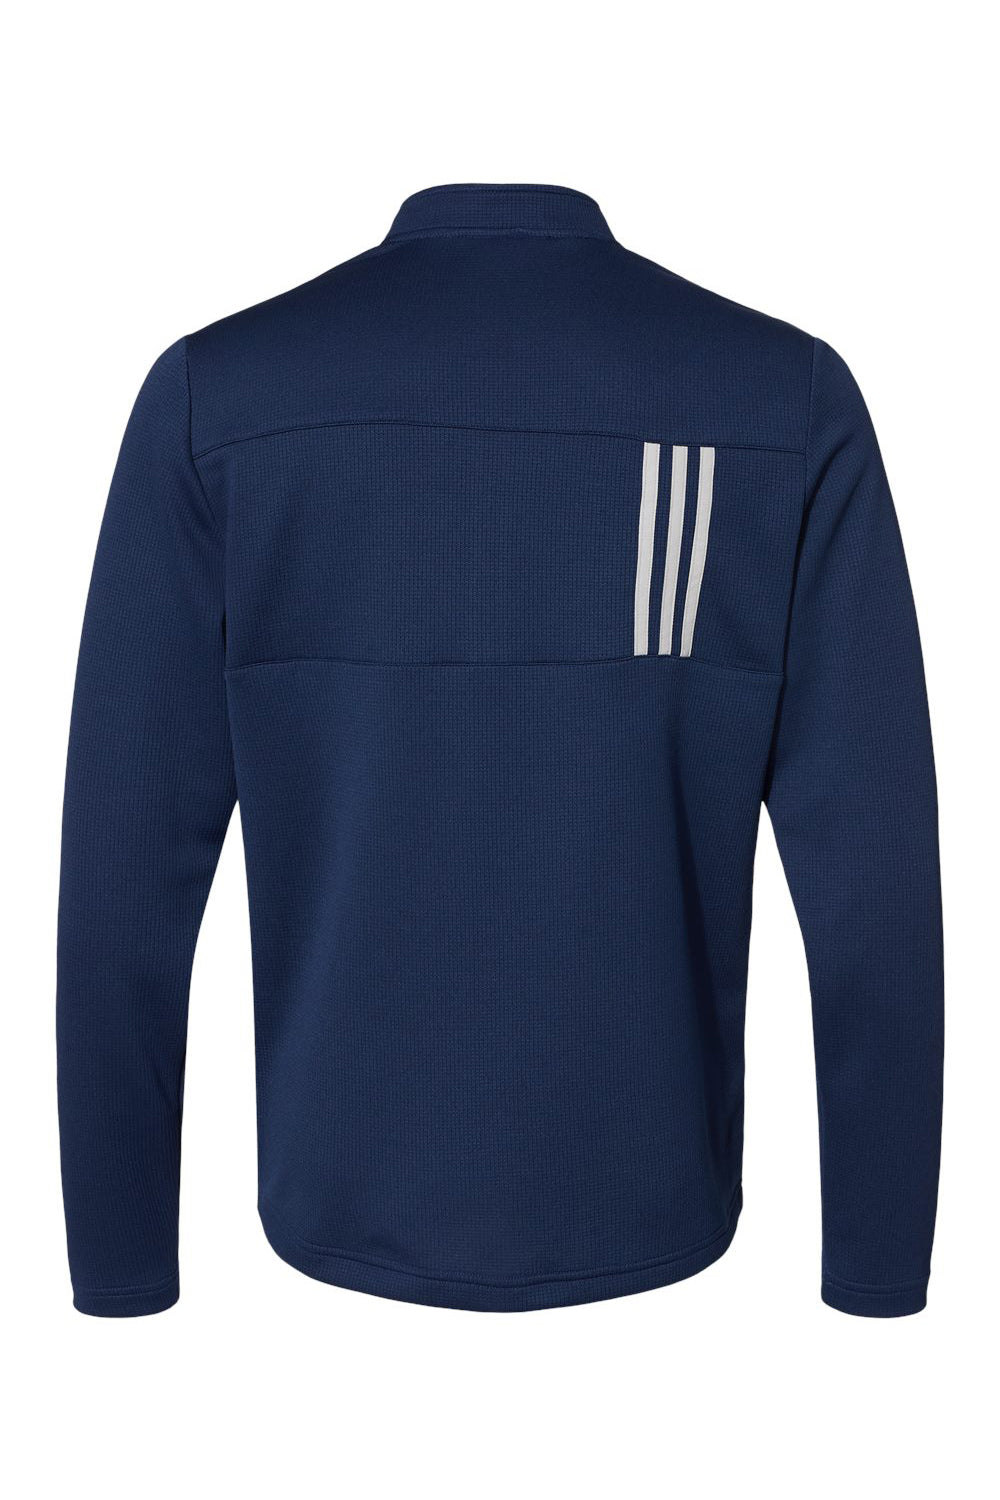 Adidas A482 Mens 3 Stripes Double Knit 1/4 Zip Pullover Team Navy Blue/Grey Flat Back